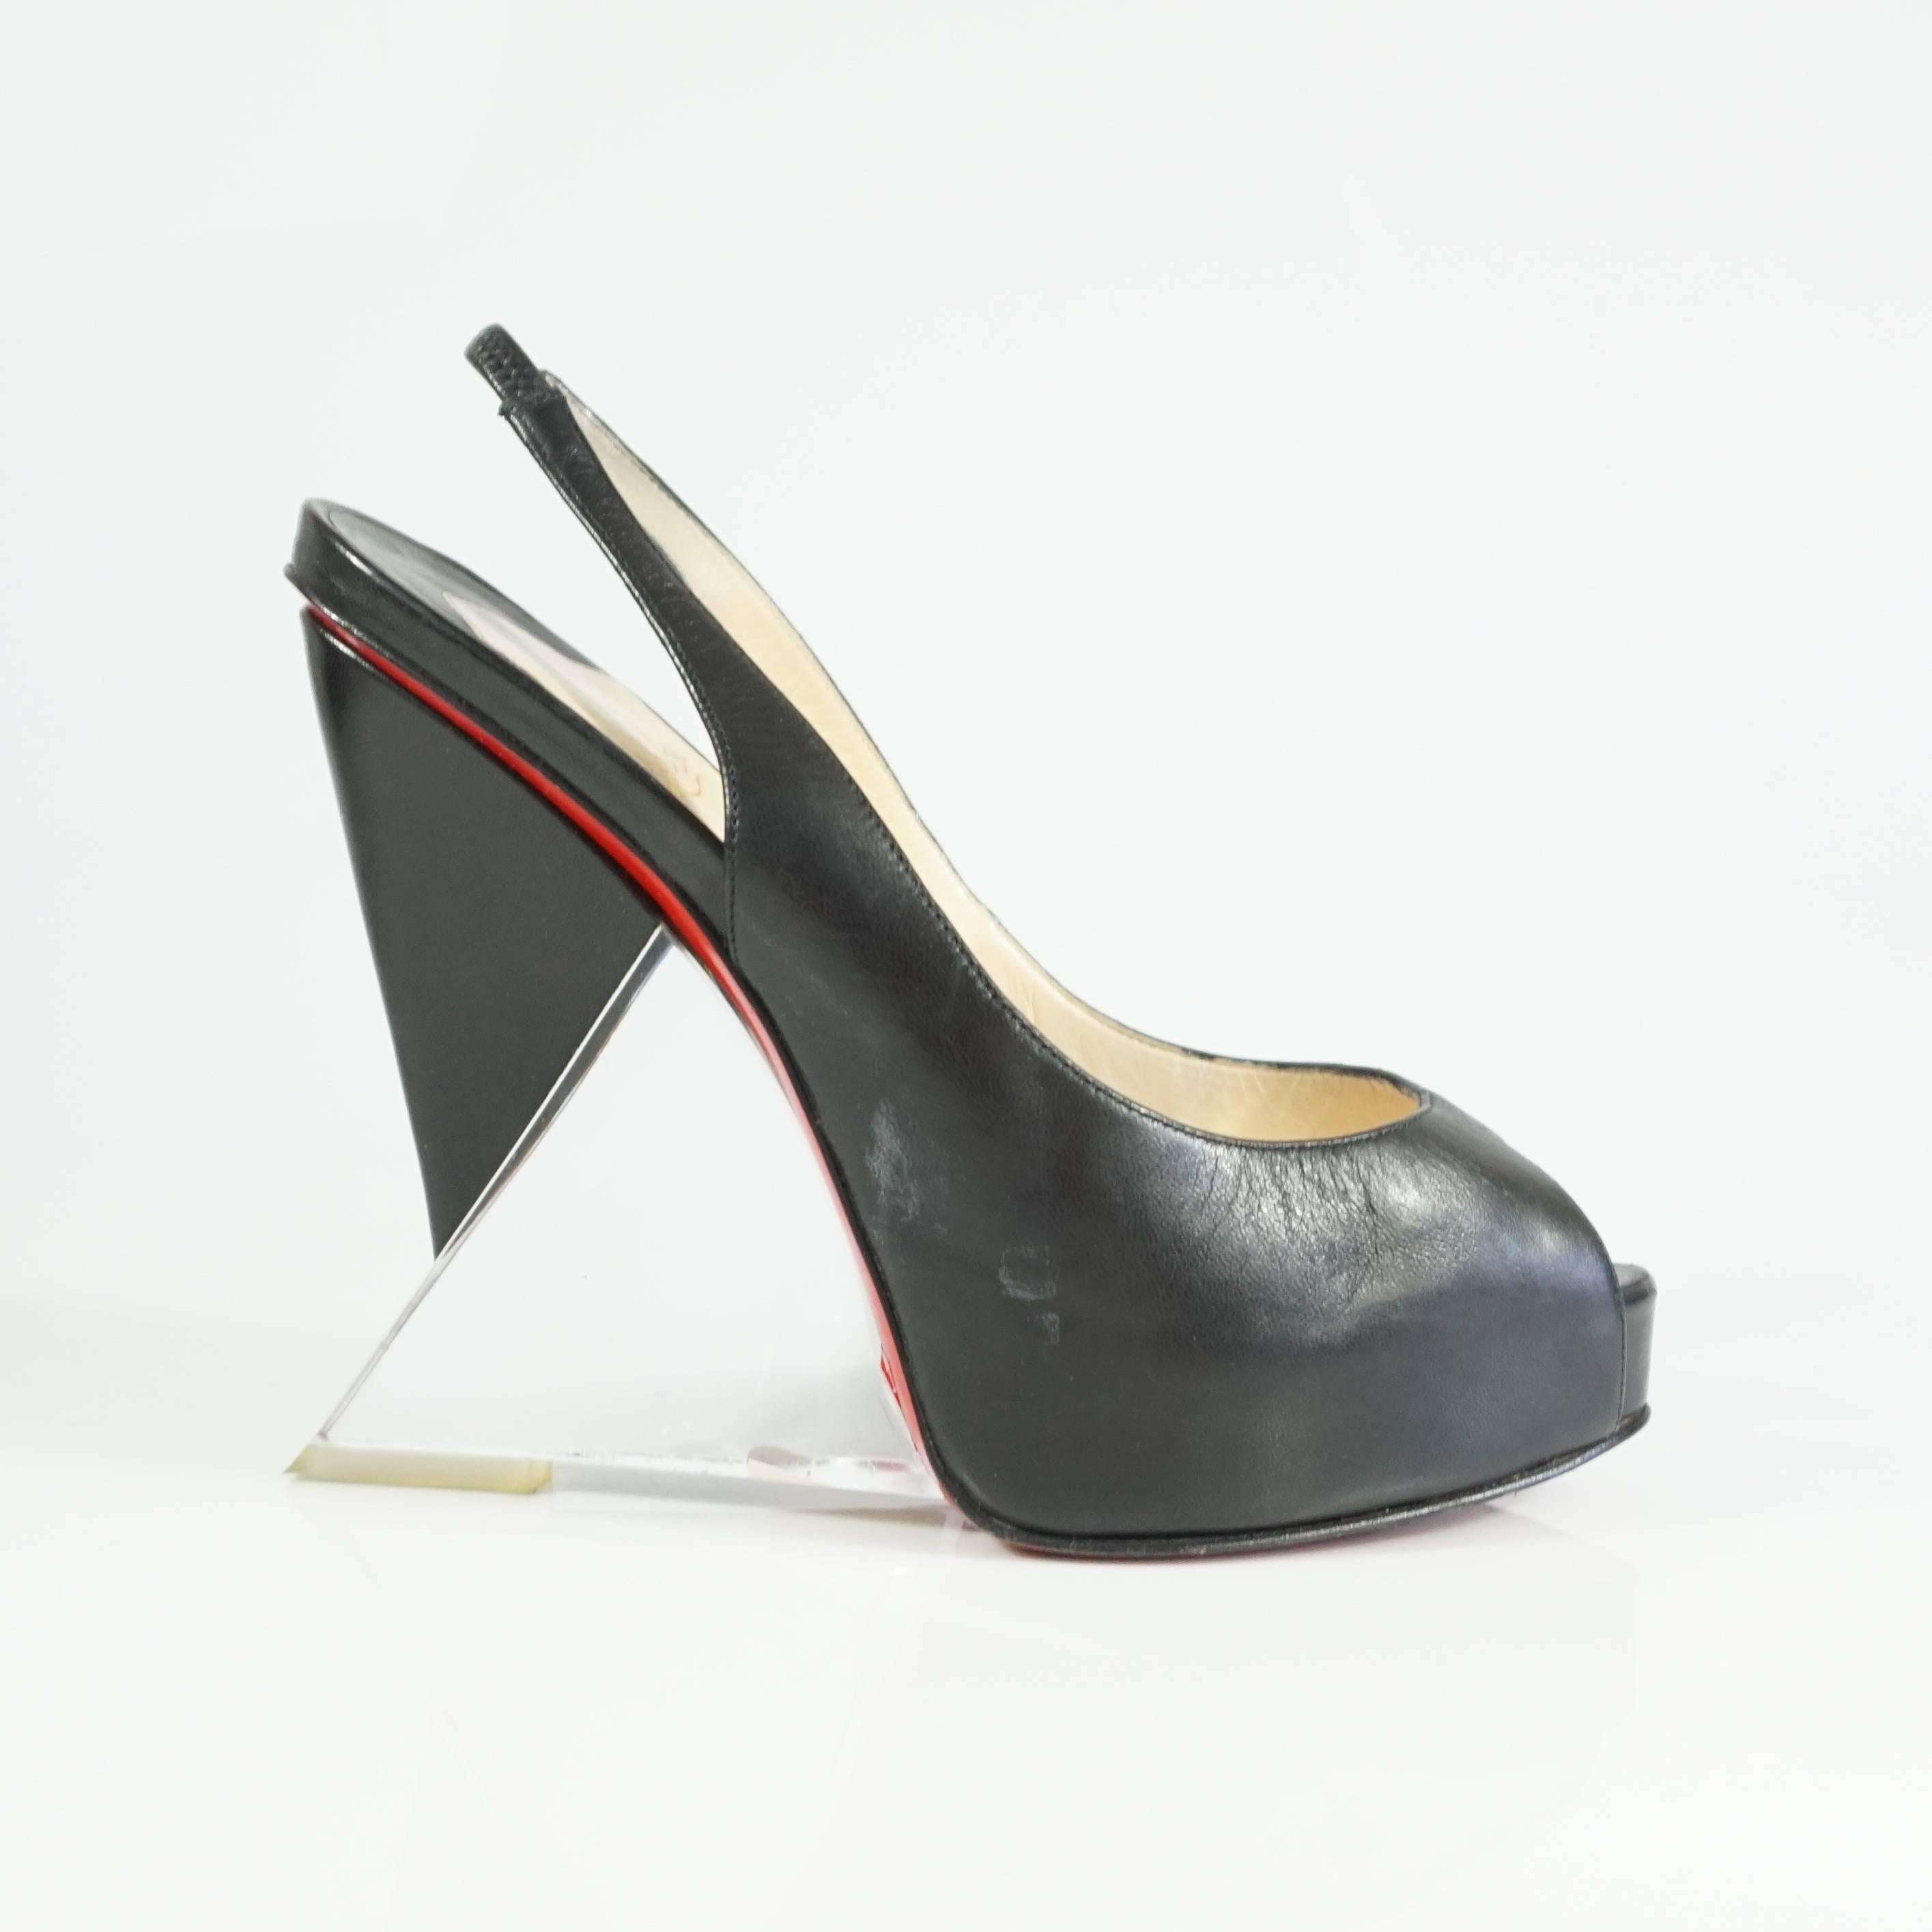 Christian Louboutin Black Leather and Lucite Slingback Peeptoe Platform - 37.5  These oh so fabulous Louboutins are truly a work of art. The black peeptoe silingback has a artistic leather and lucite combo wedge heel. The Shoe is in good condition